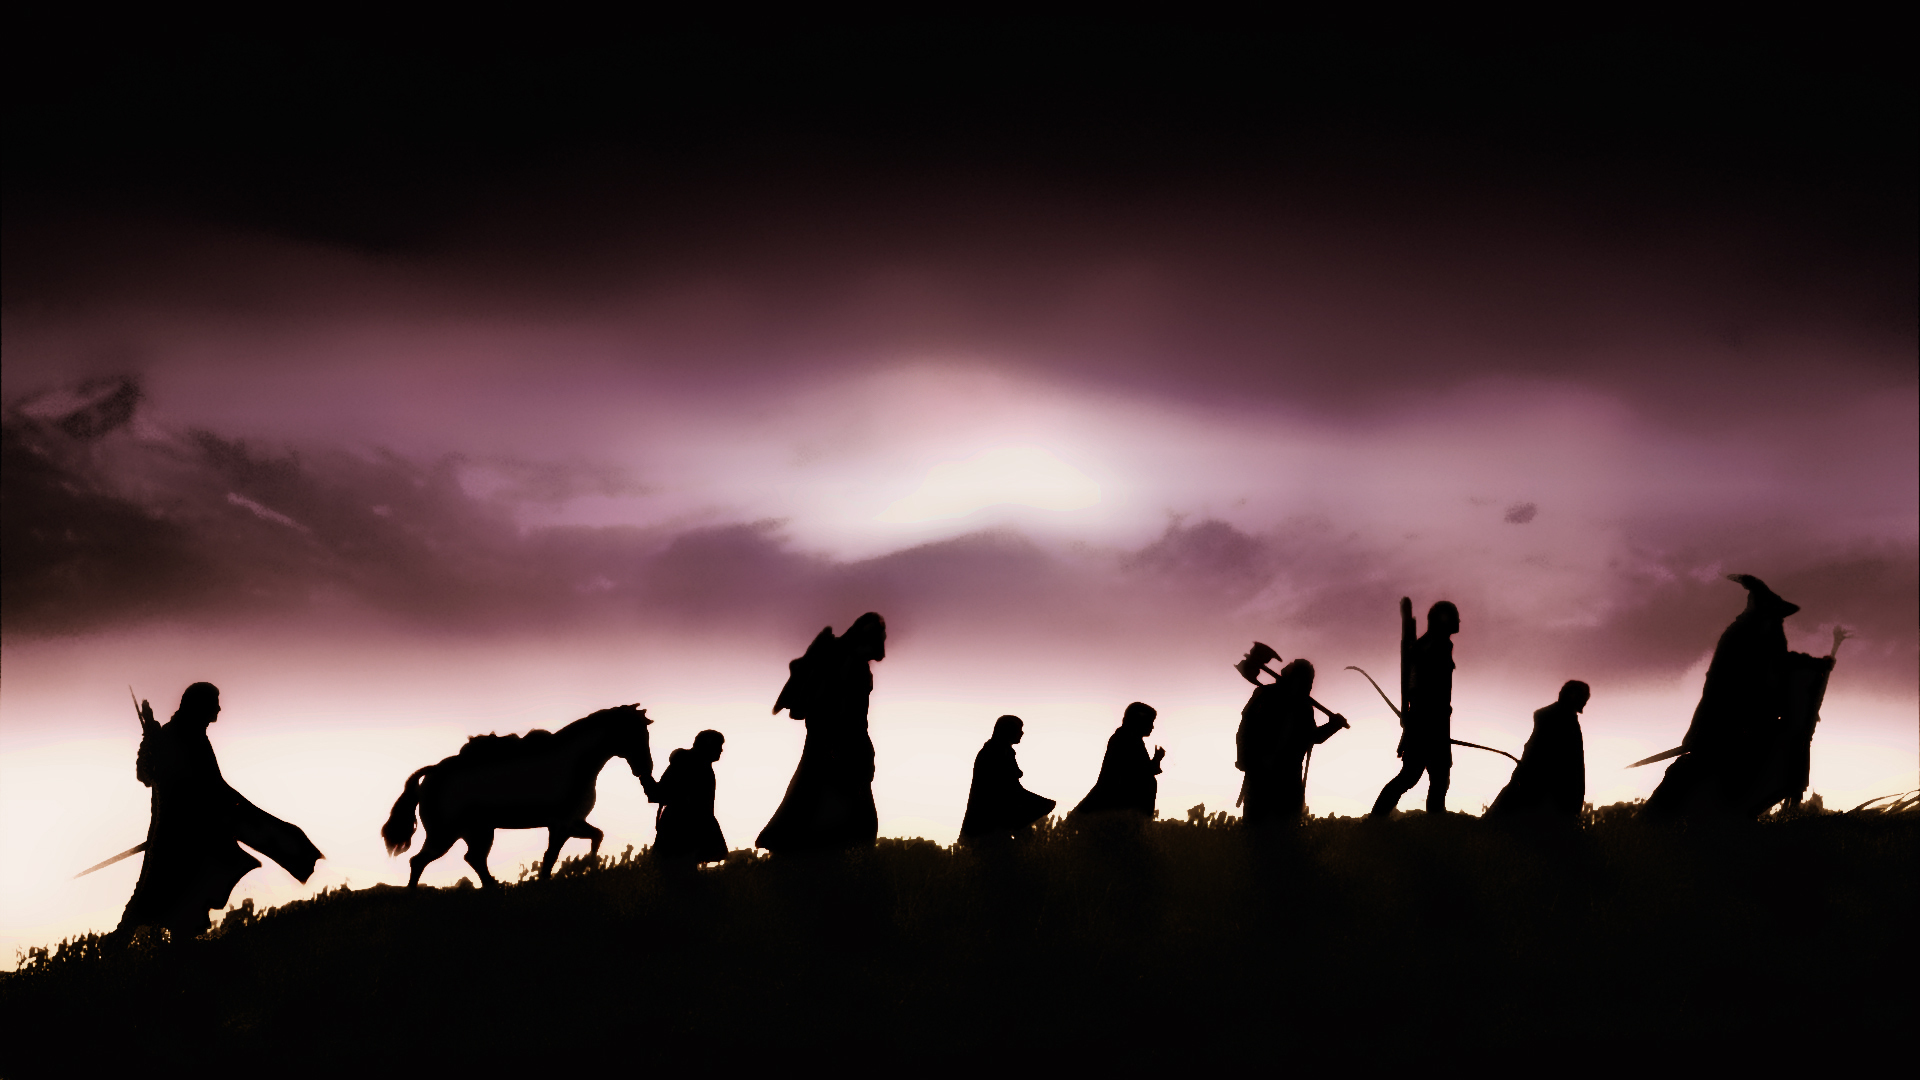 lord-of-the-rings-fellowship-of-the-ring-the-silhouettes